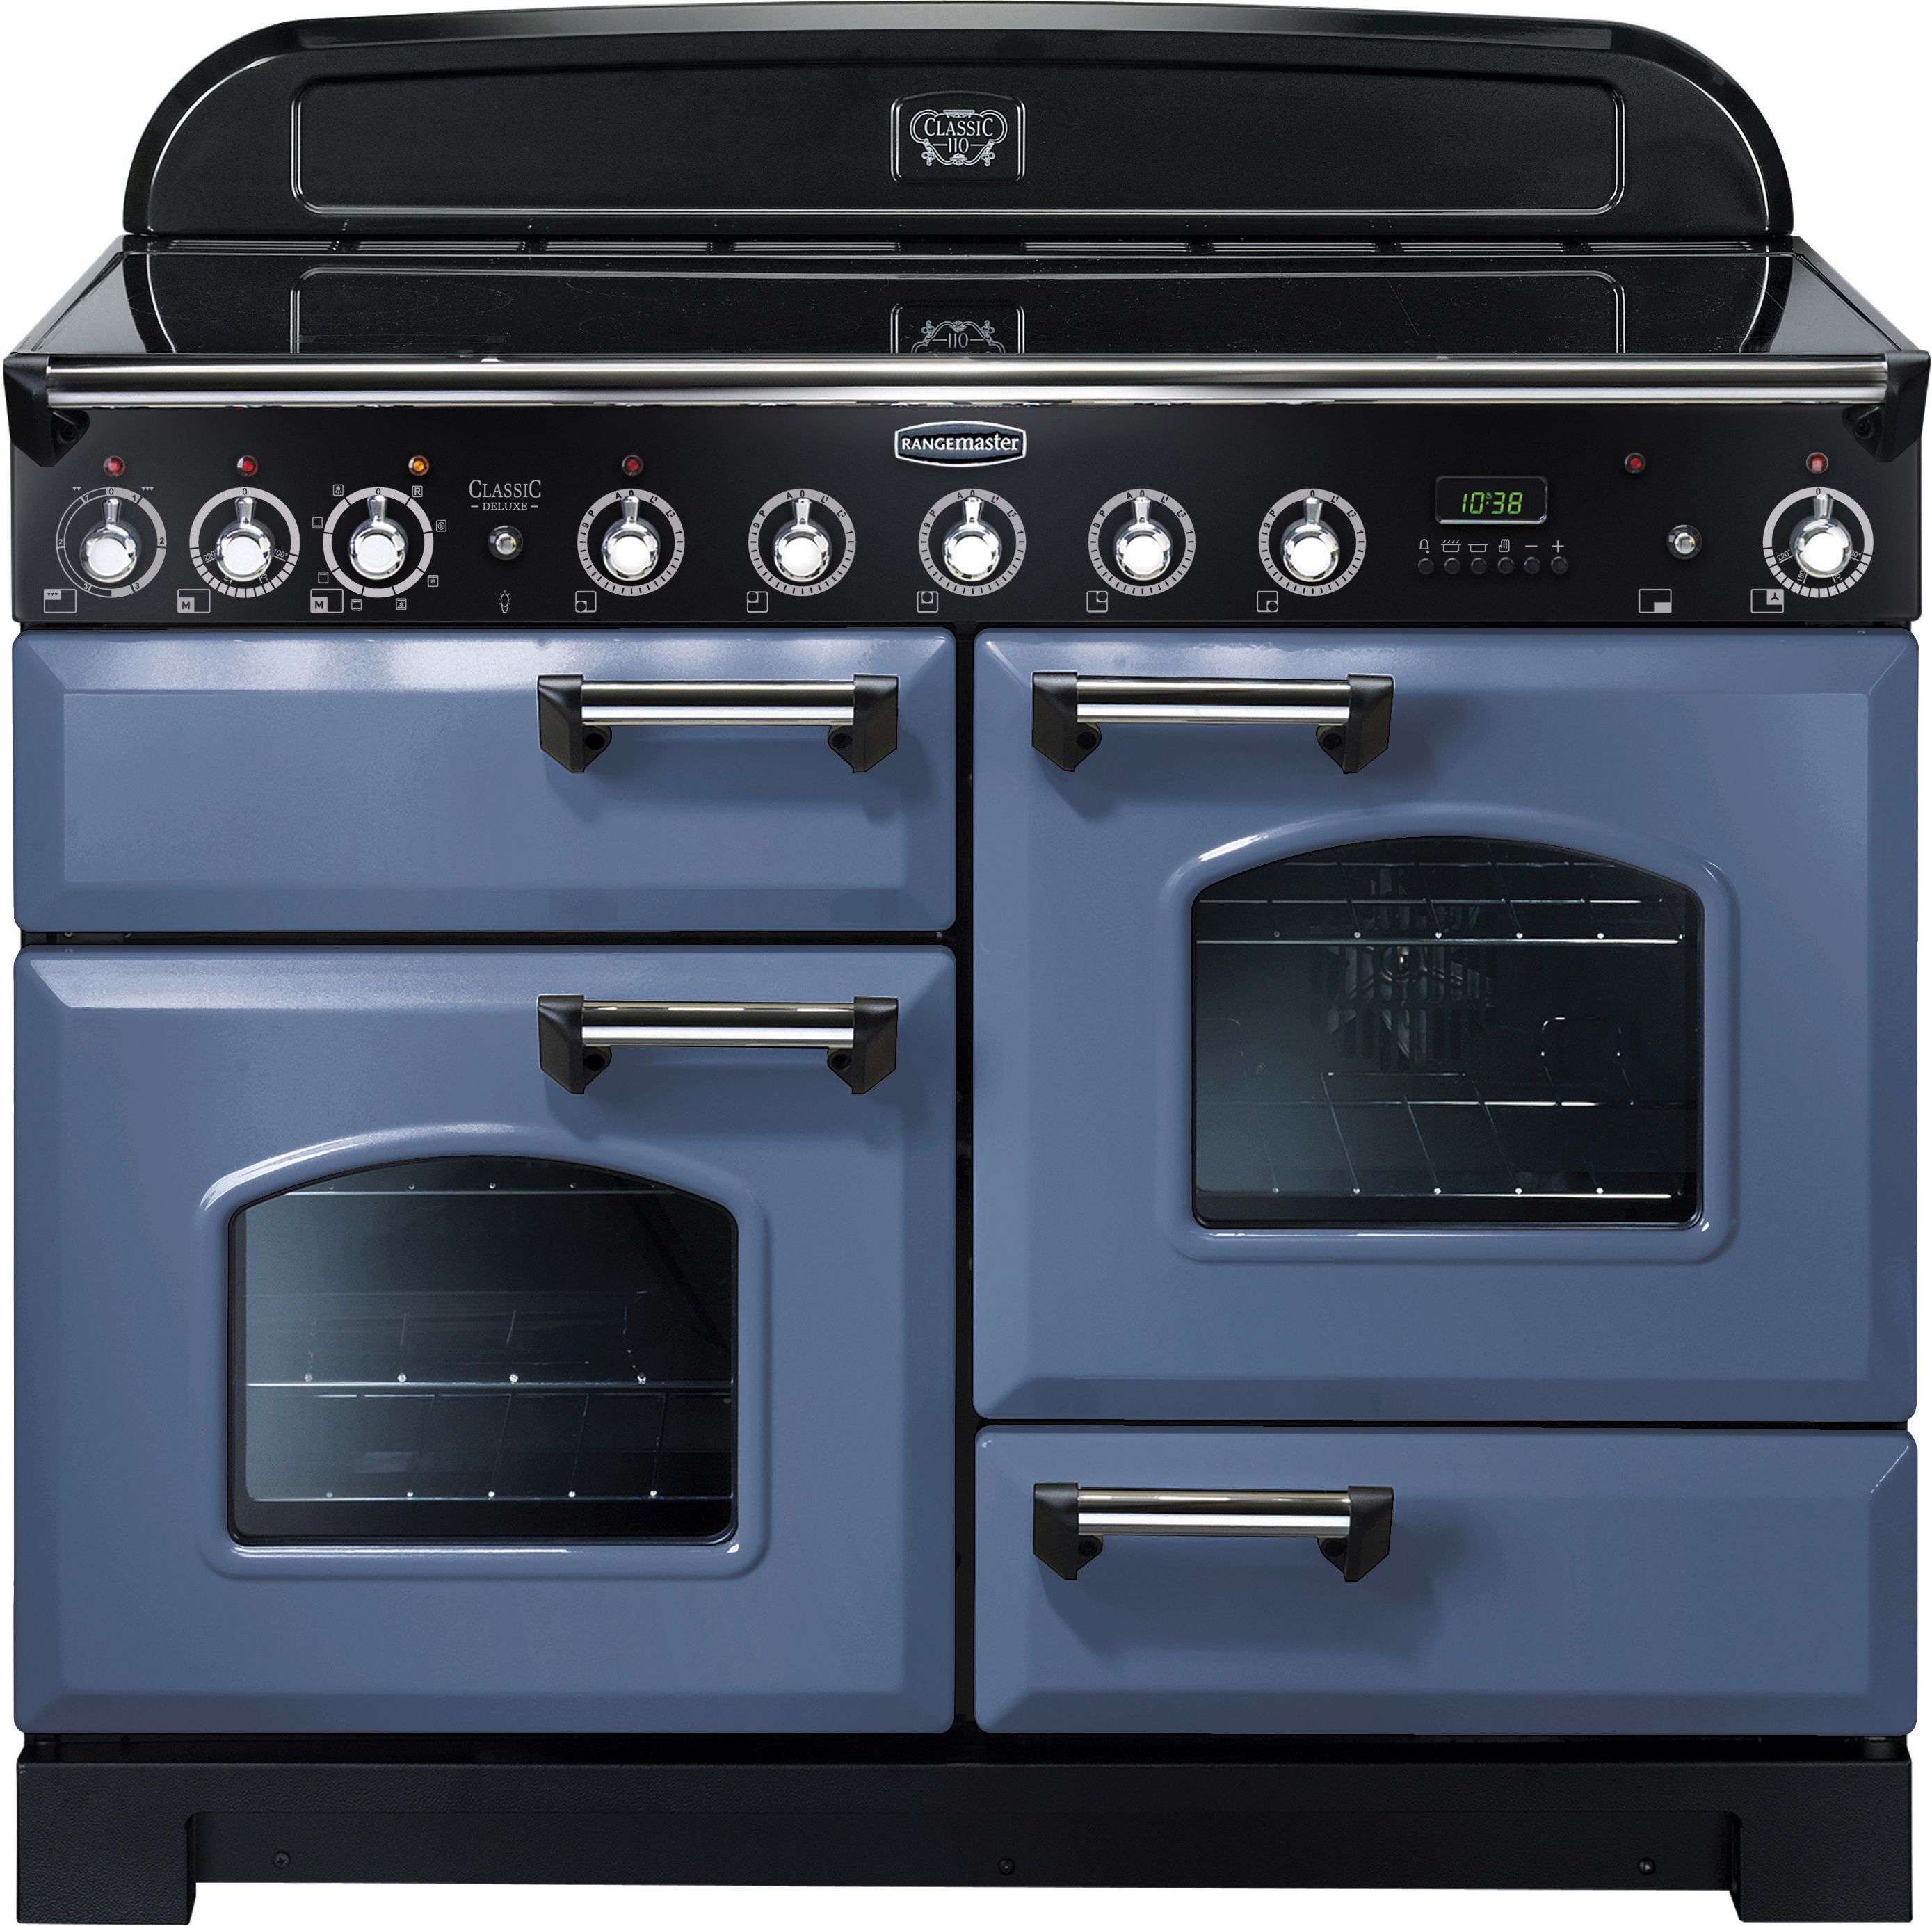 Rangemaster Classic Deluxe CDL110EISB/C 110cm Electric Range Cooker with Induction Hob - Stone Blue / Chrome - A/A Rated, Blue